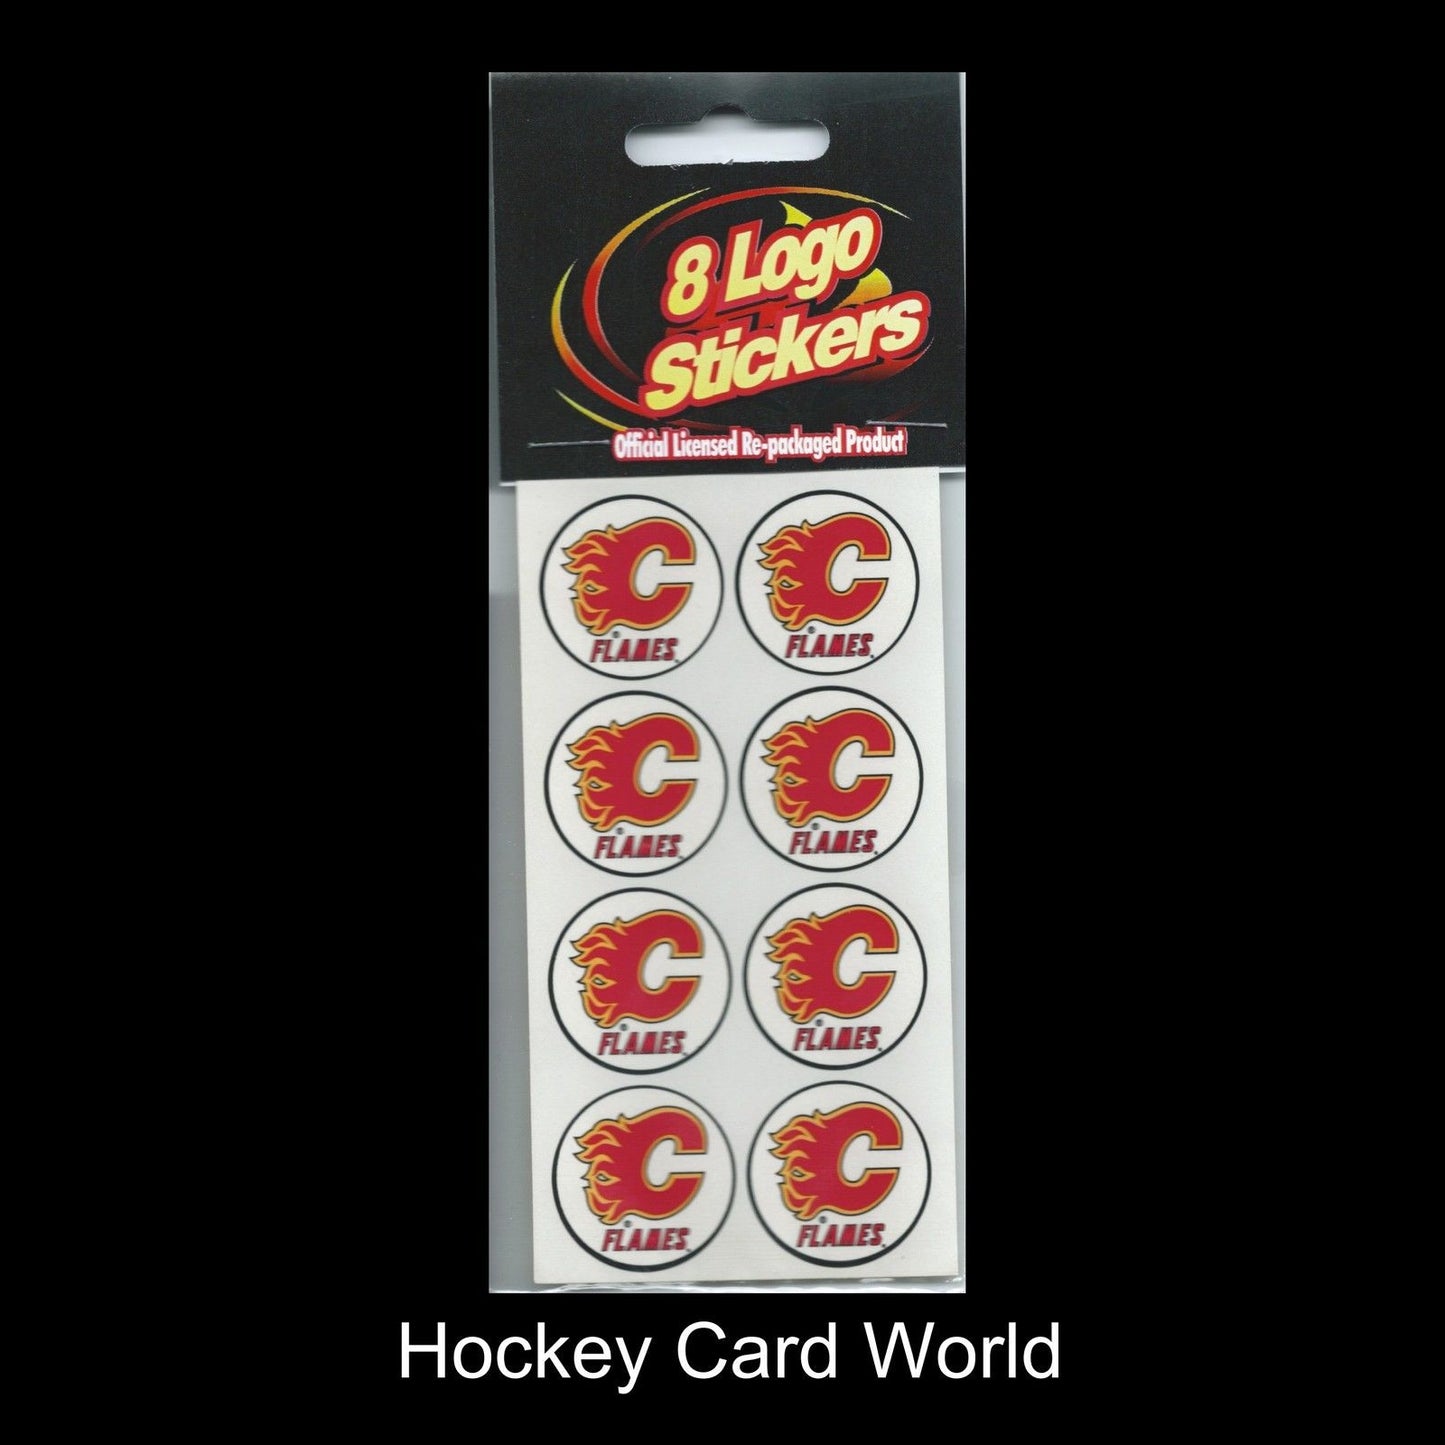 Calgary Flames  Official Licensed 8 Stickers Decal Sheet 2.5" x 5"